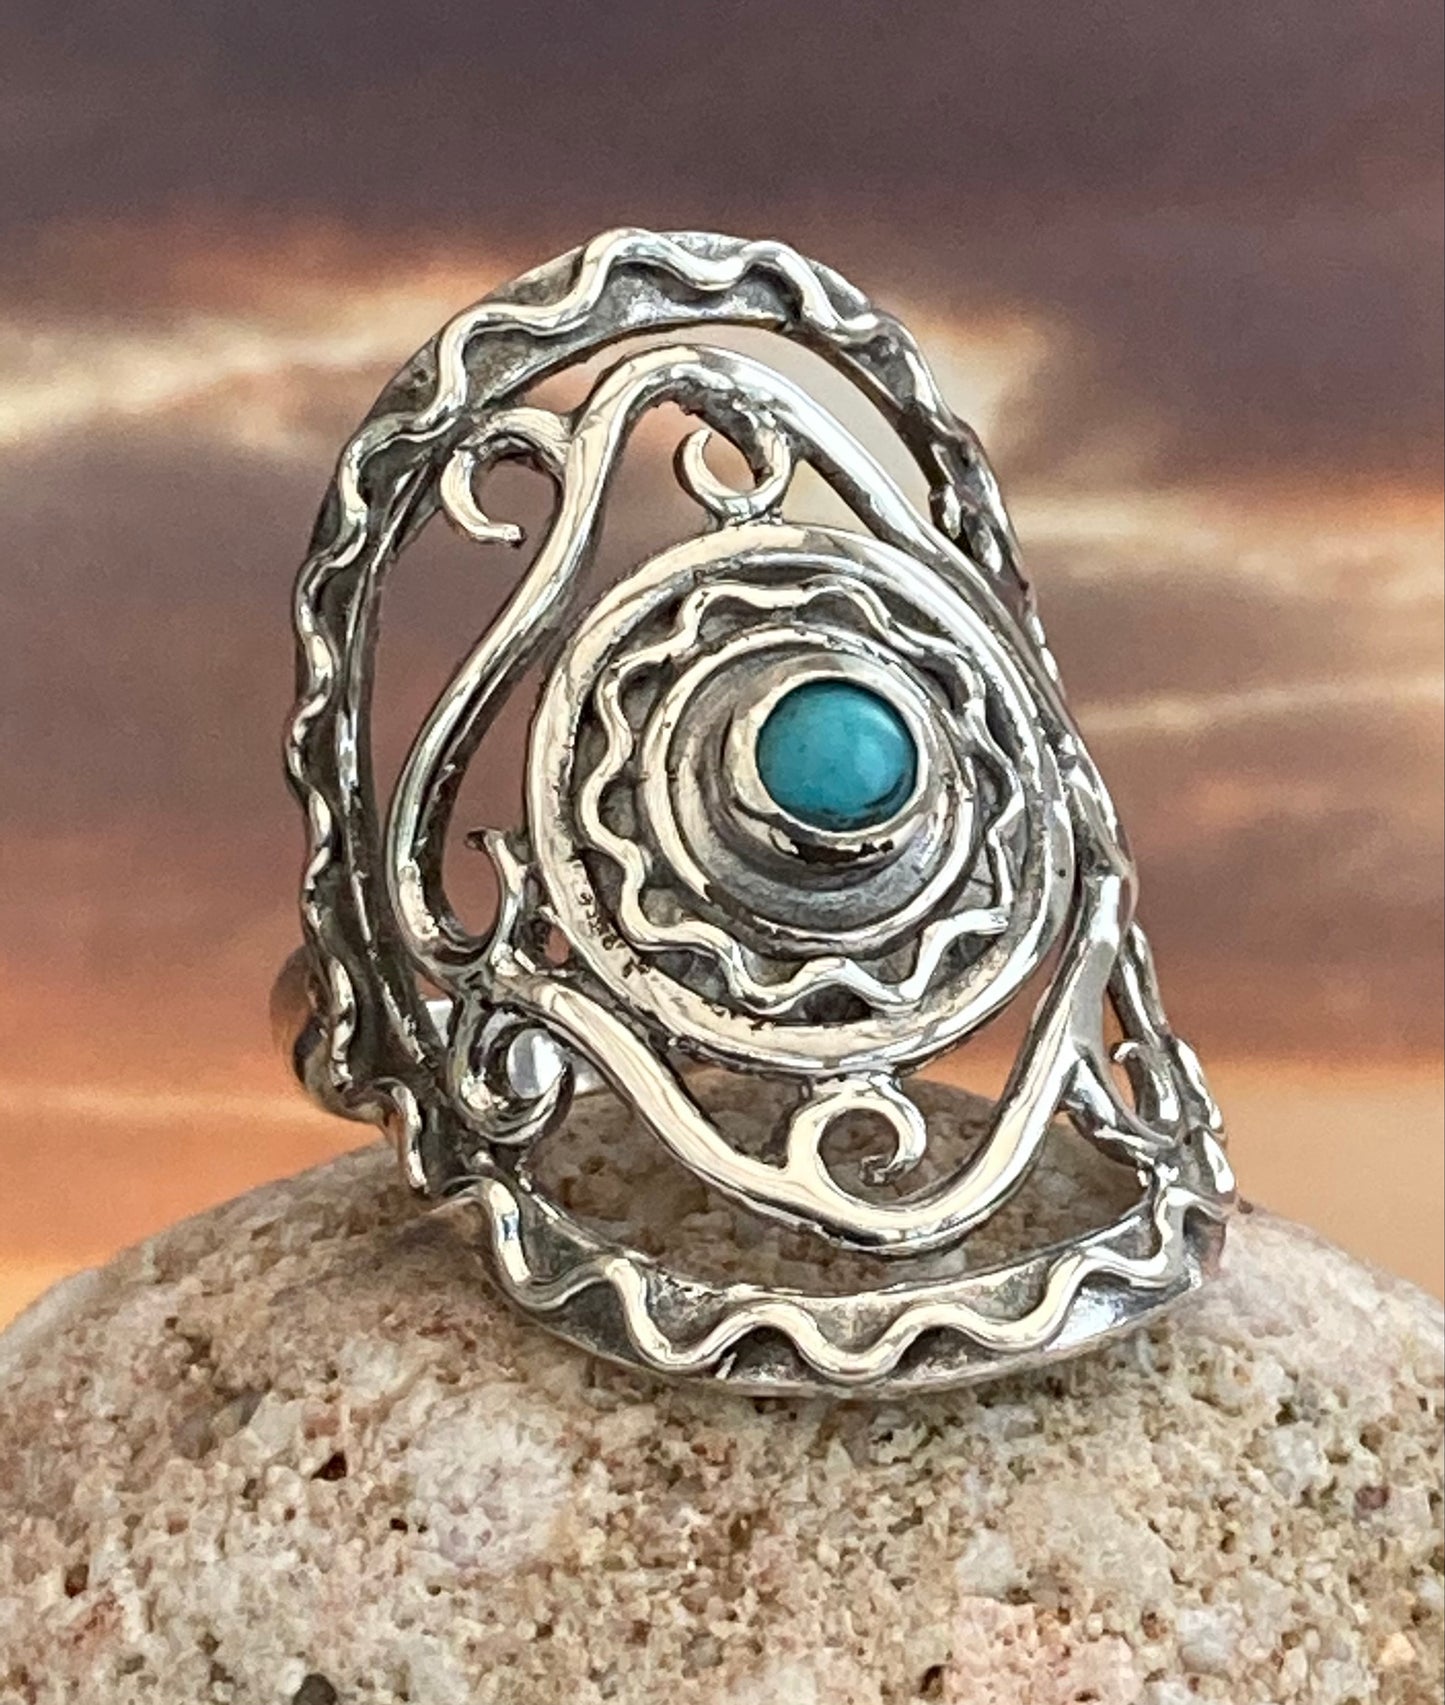 Ancient Gower inspired ring